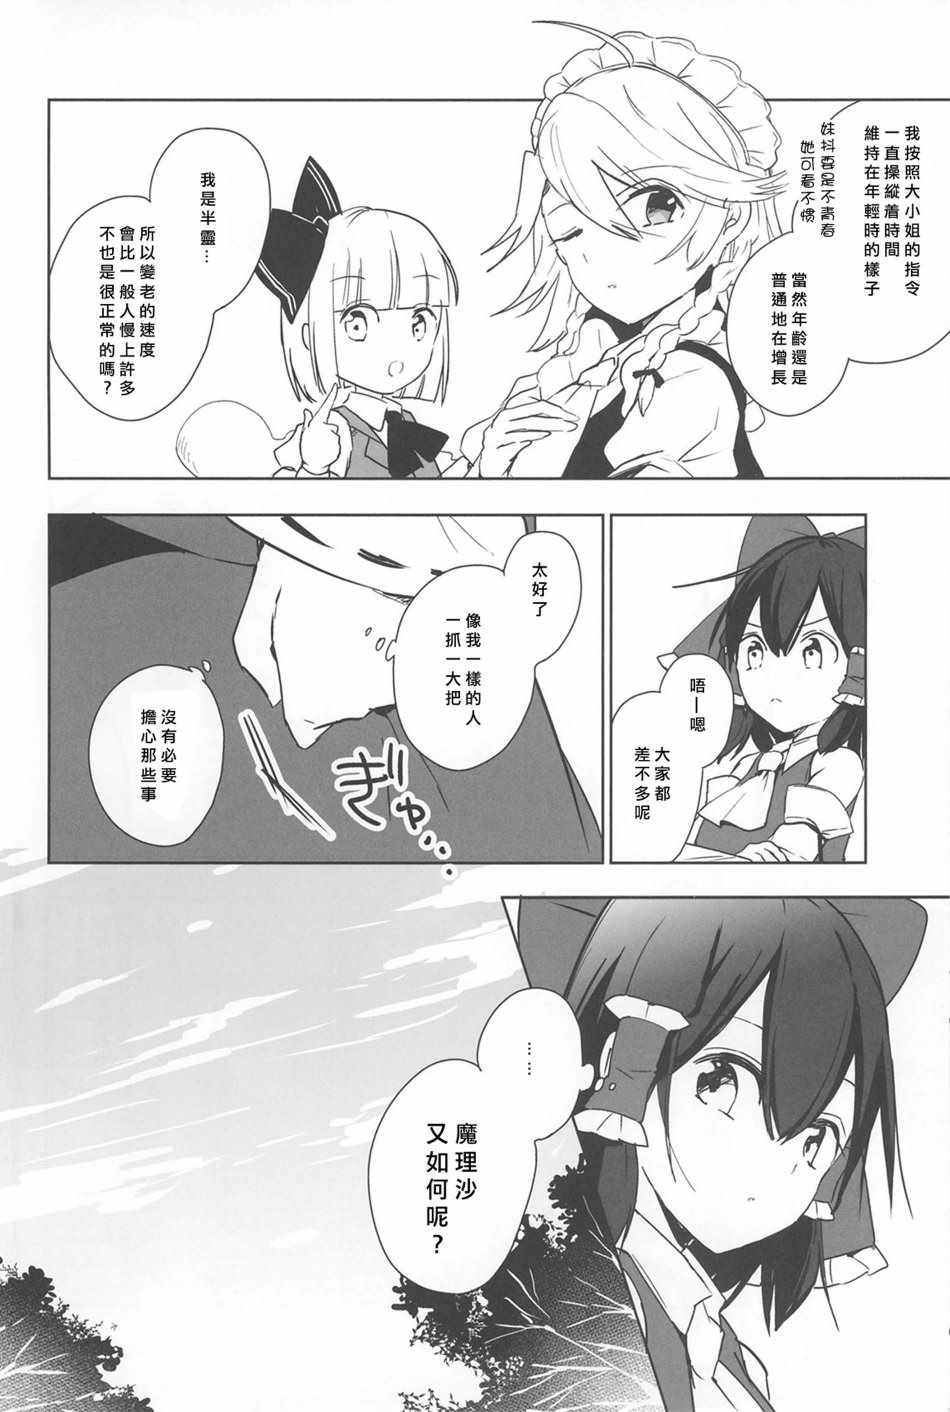 《LOST GIRL·LOST LADY》漫画 LOST GIRL LOST LADY 001话